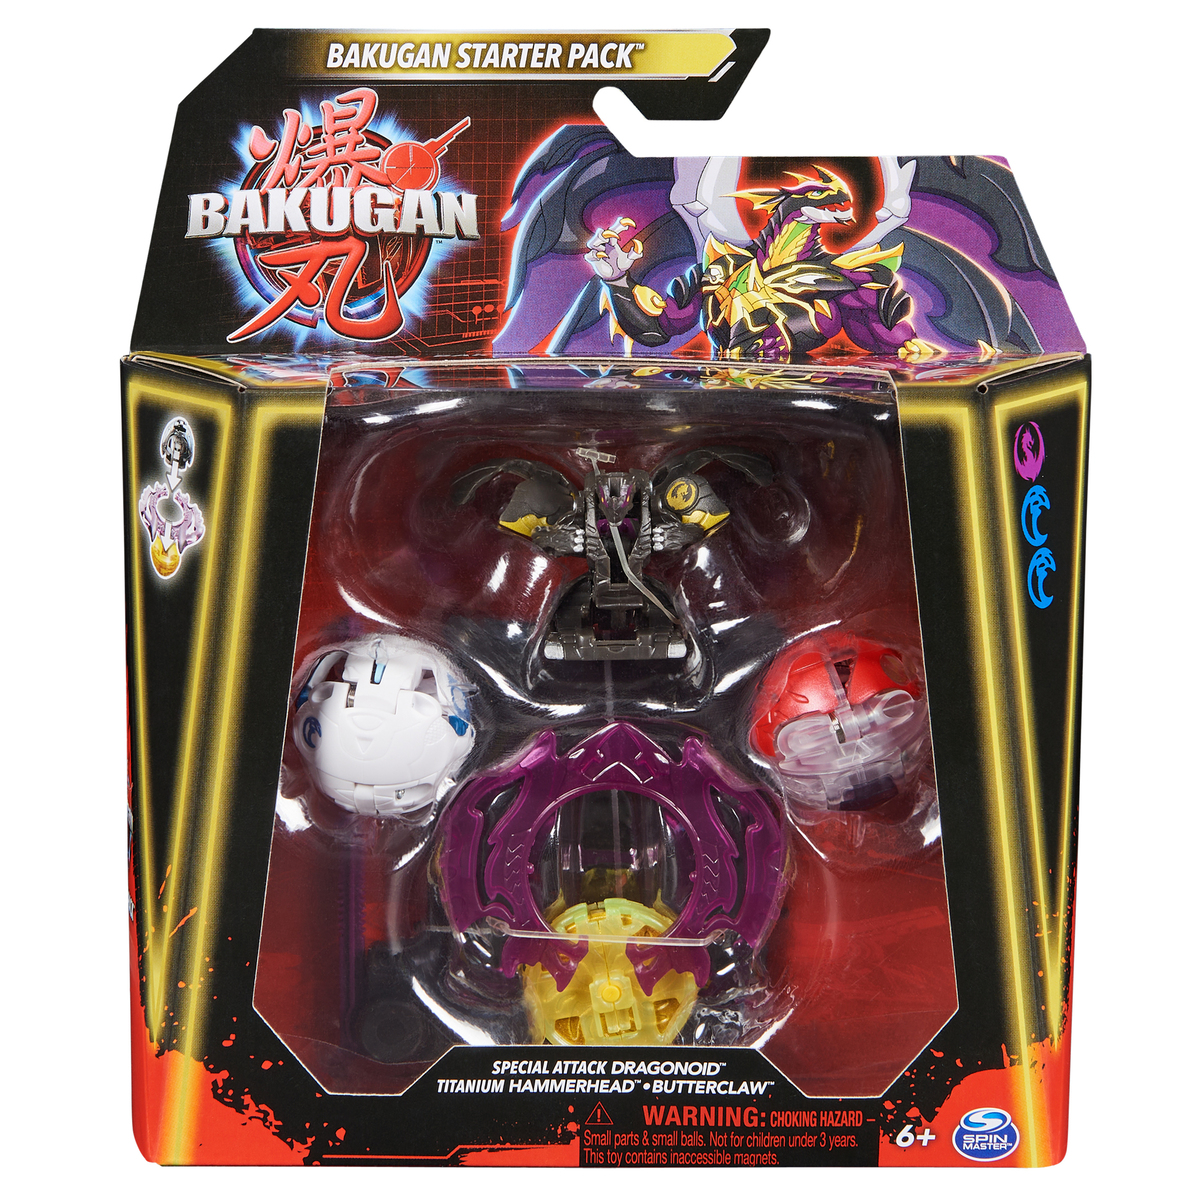 Bakugan Starter Pack - Special Attack Dragonoid, Titanium Hammerhead And Butterclaw Figures